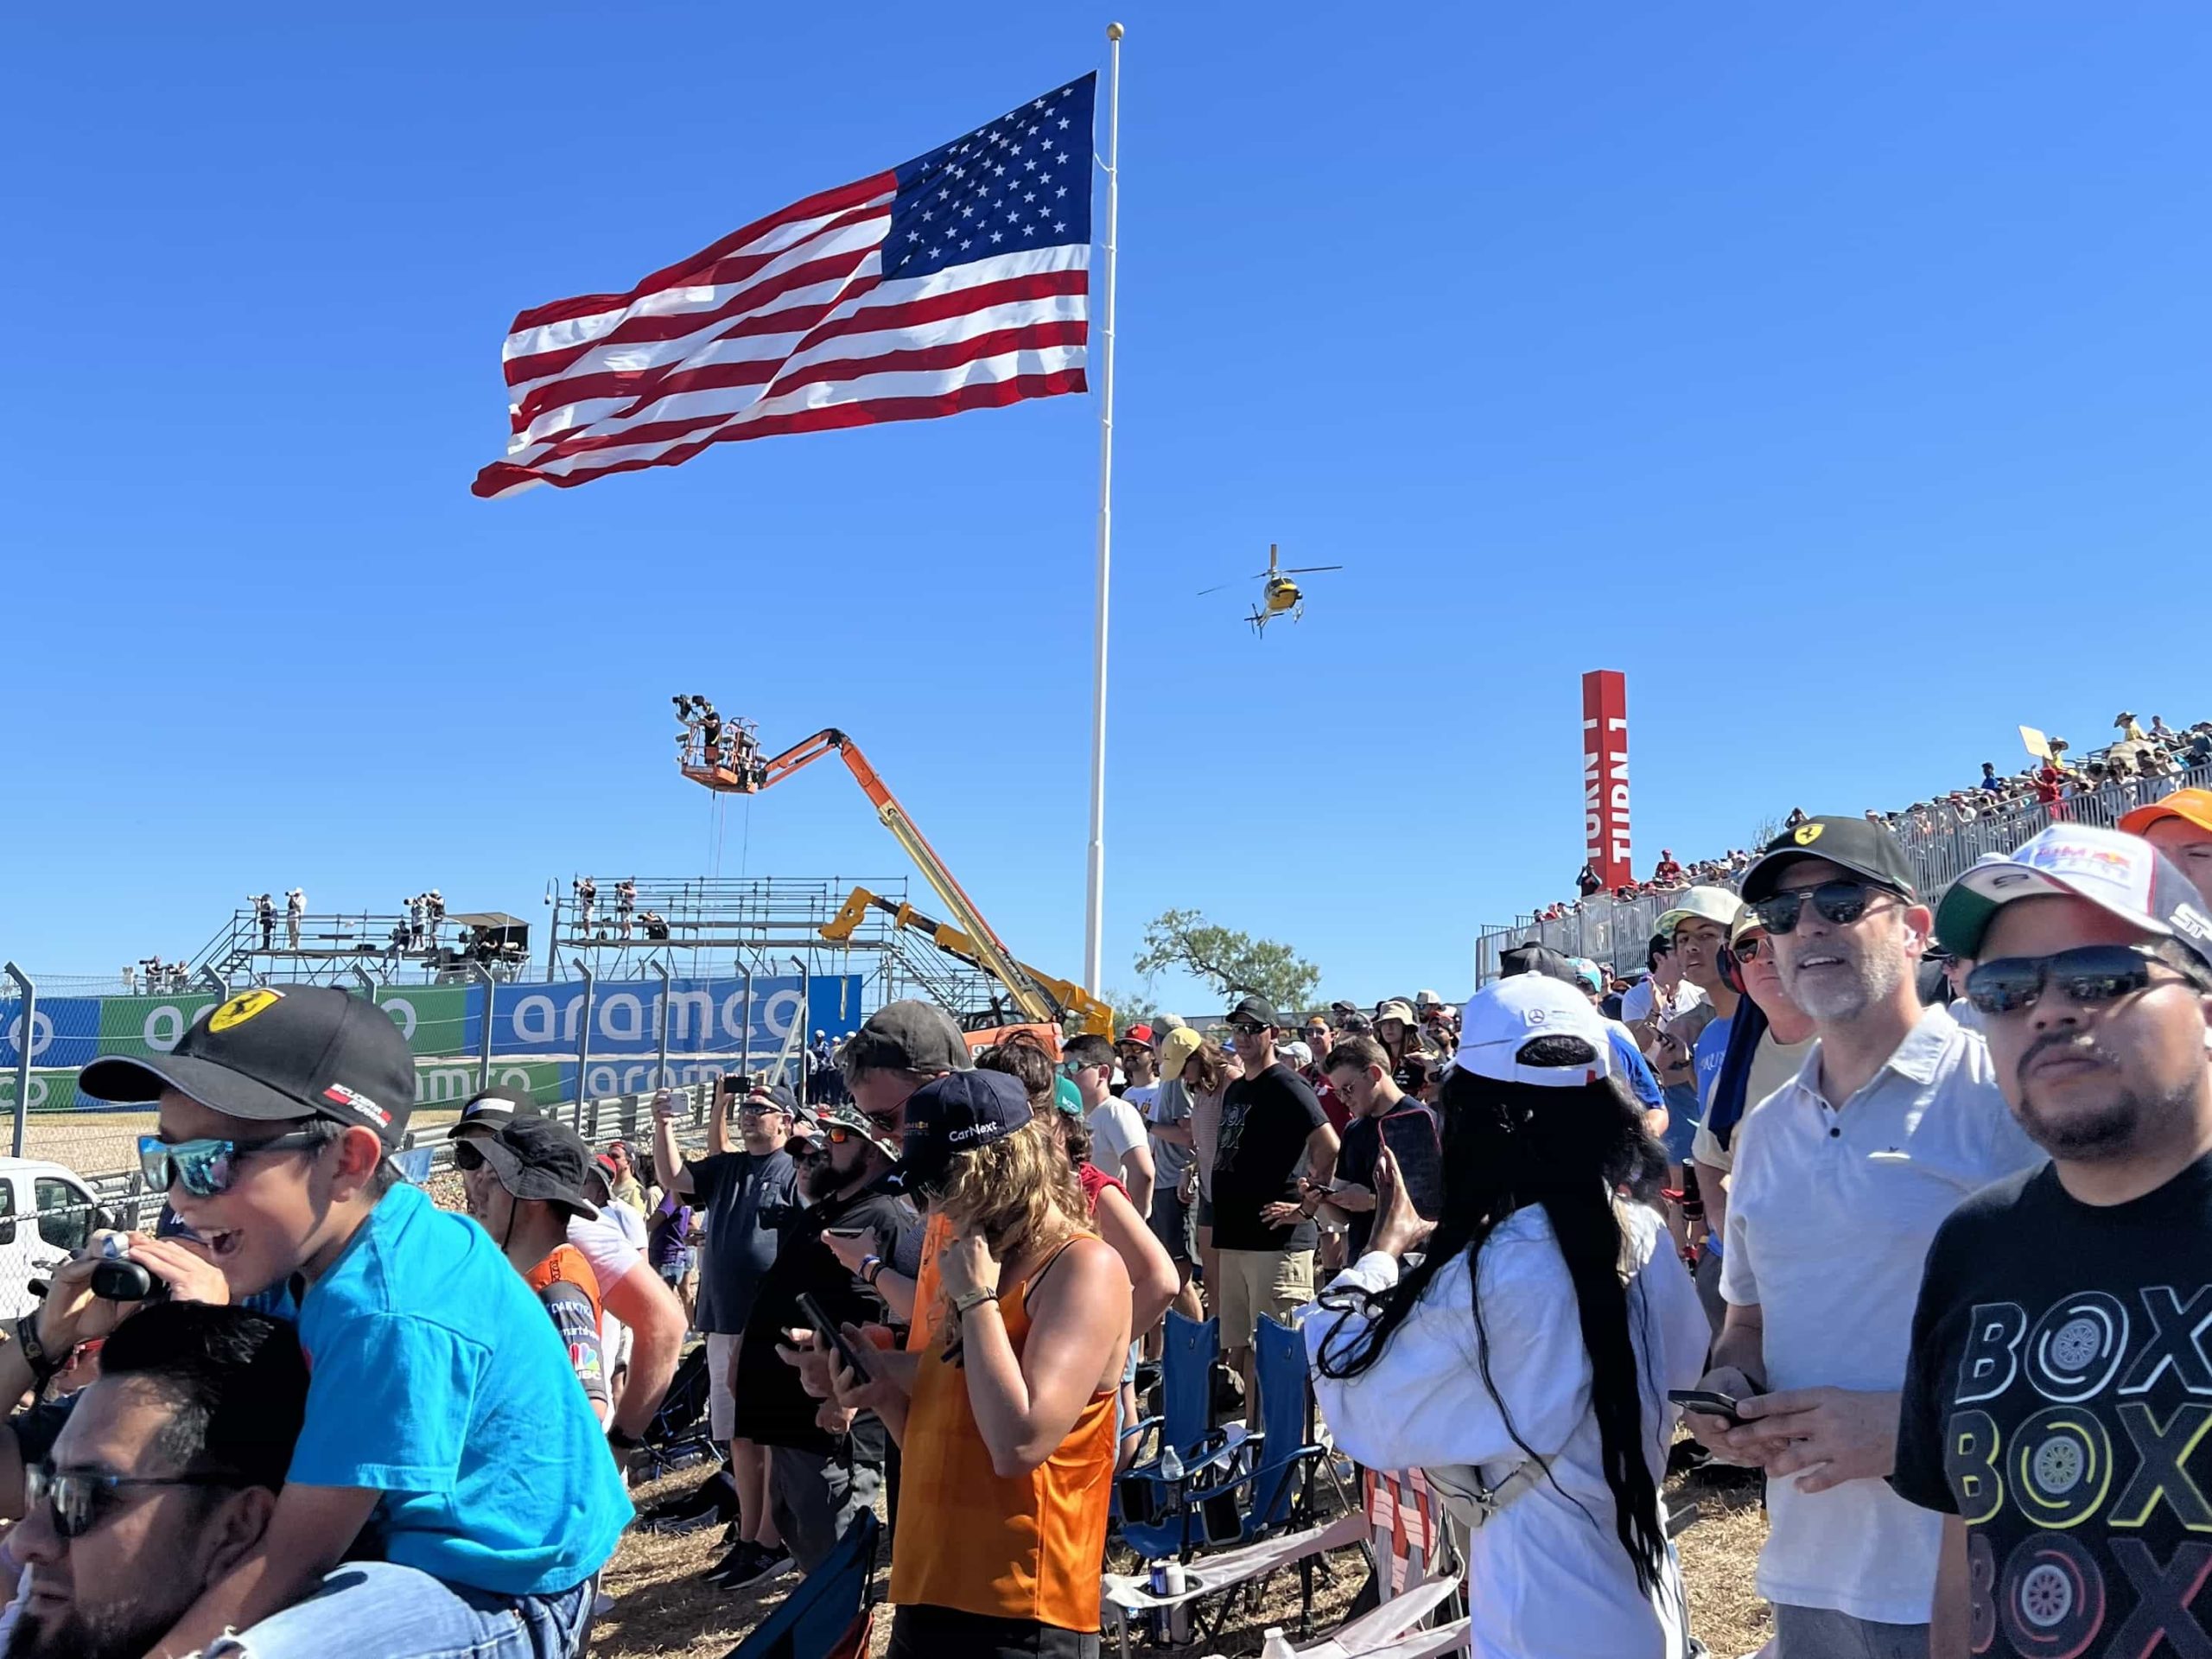 F1 fans watching a race, with a giant American flag in the background